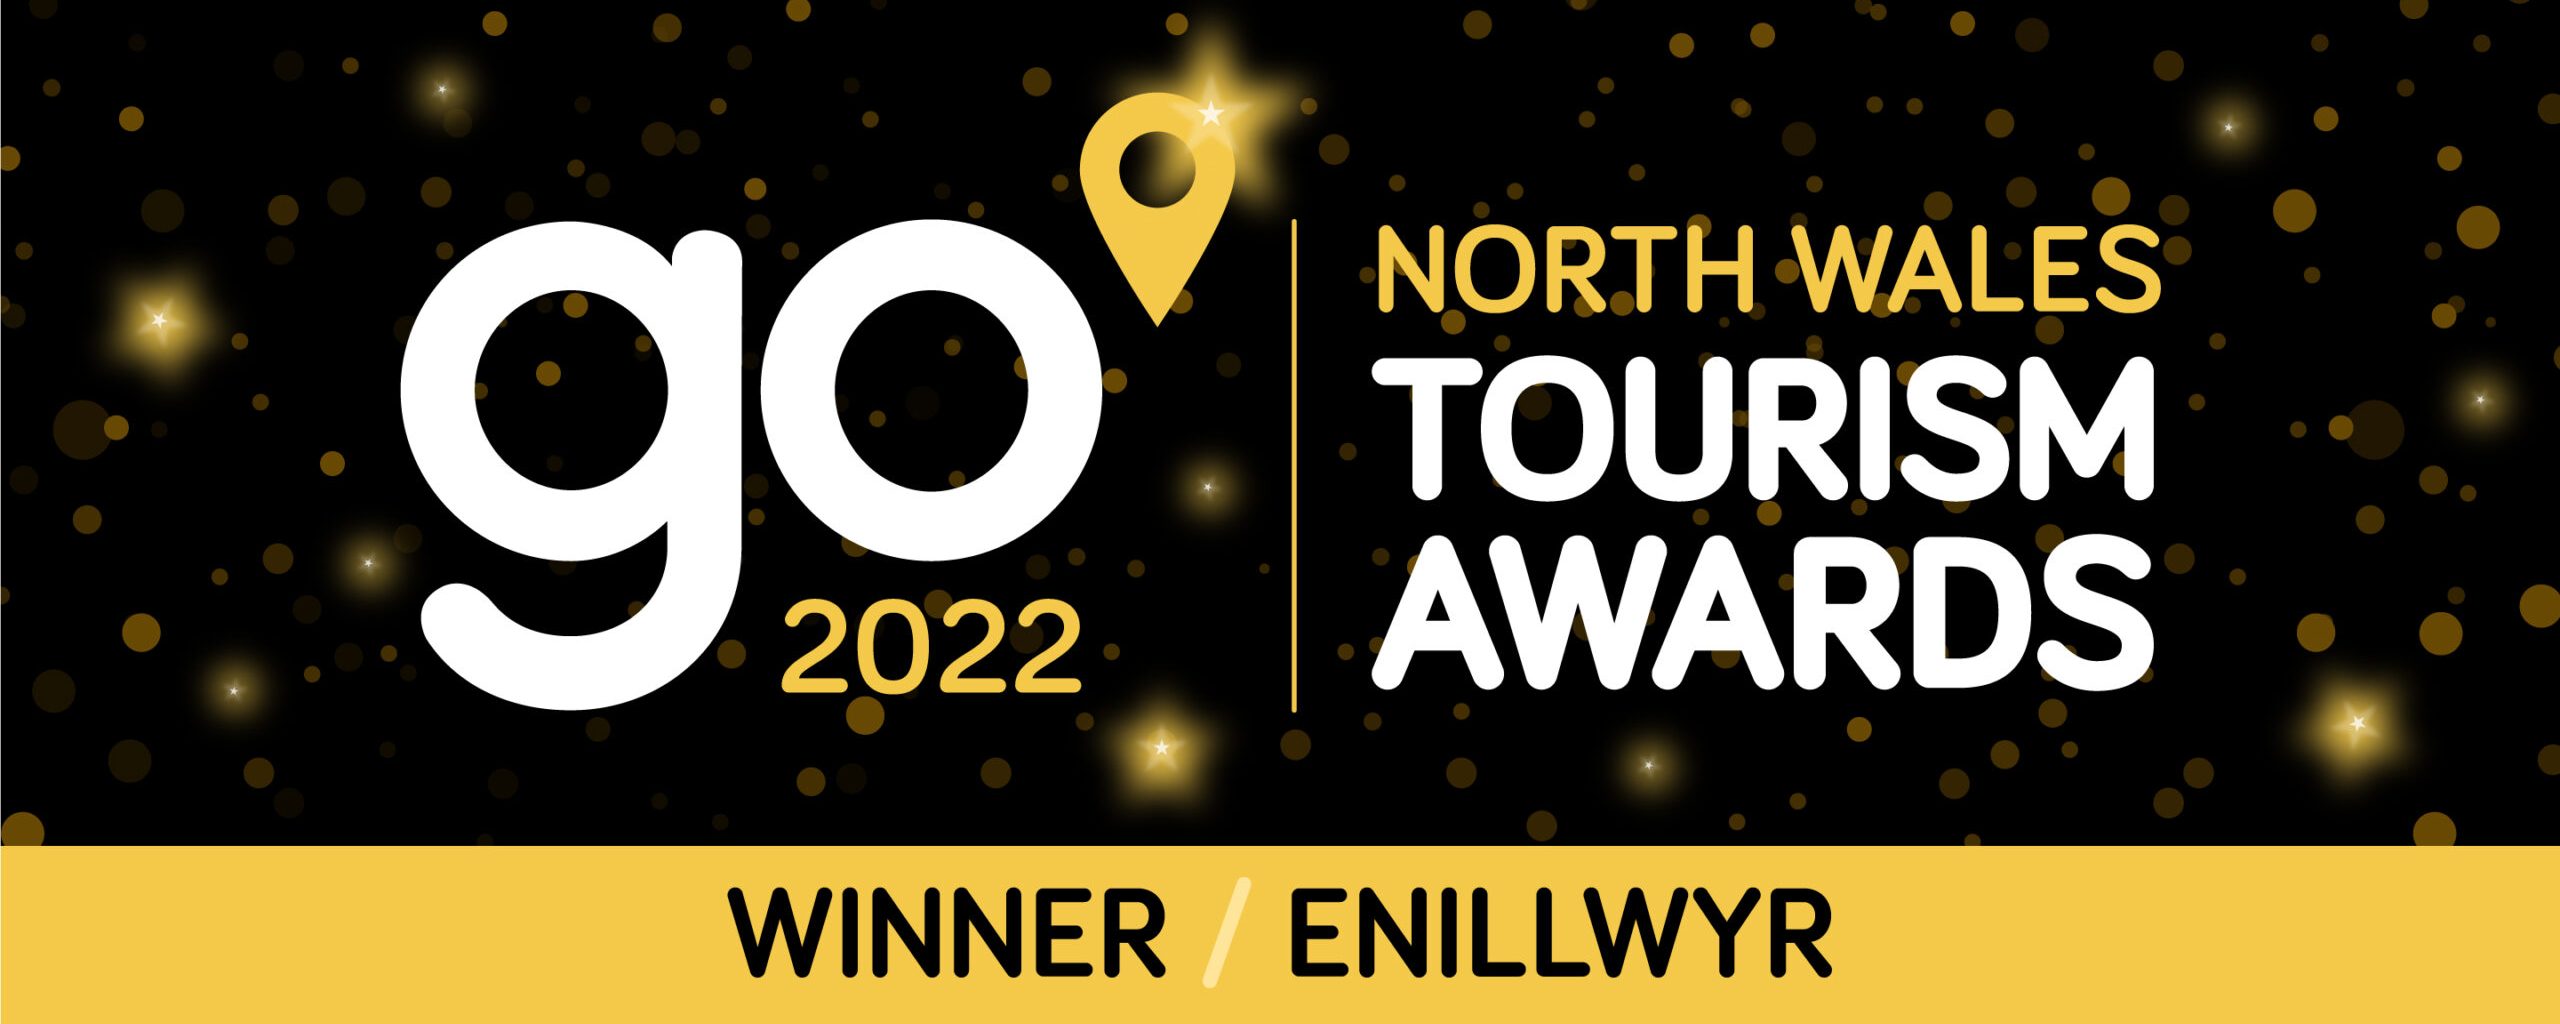 Ambassador Wales one of the winners at the Go North Wales Tourism Awards